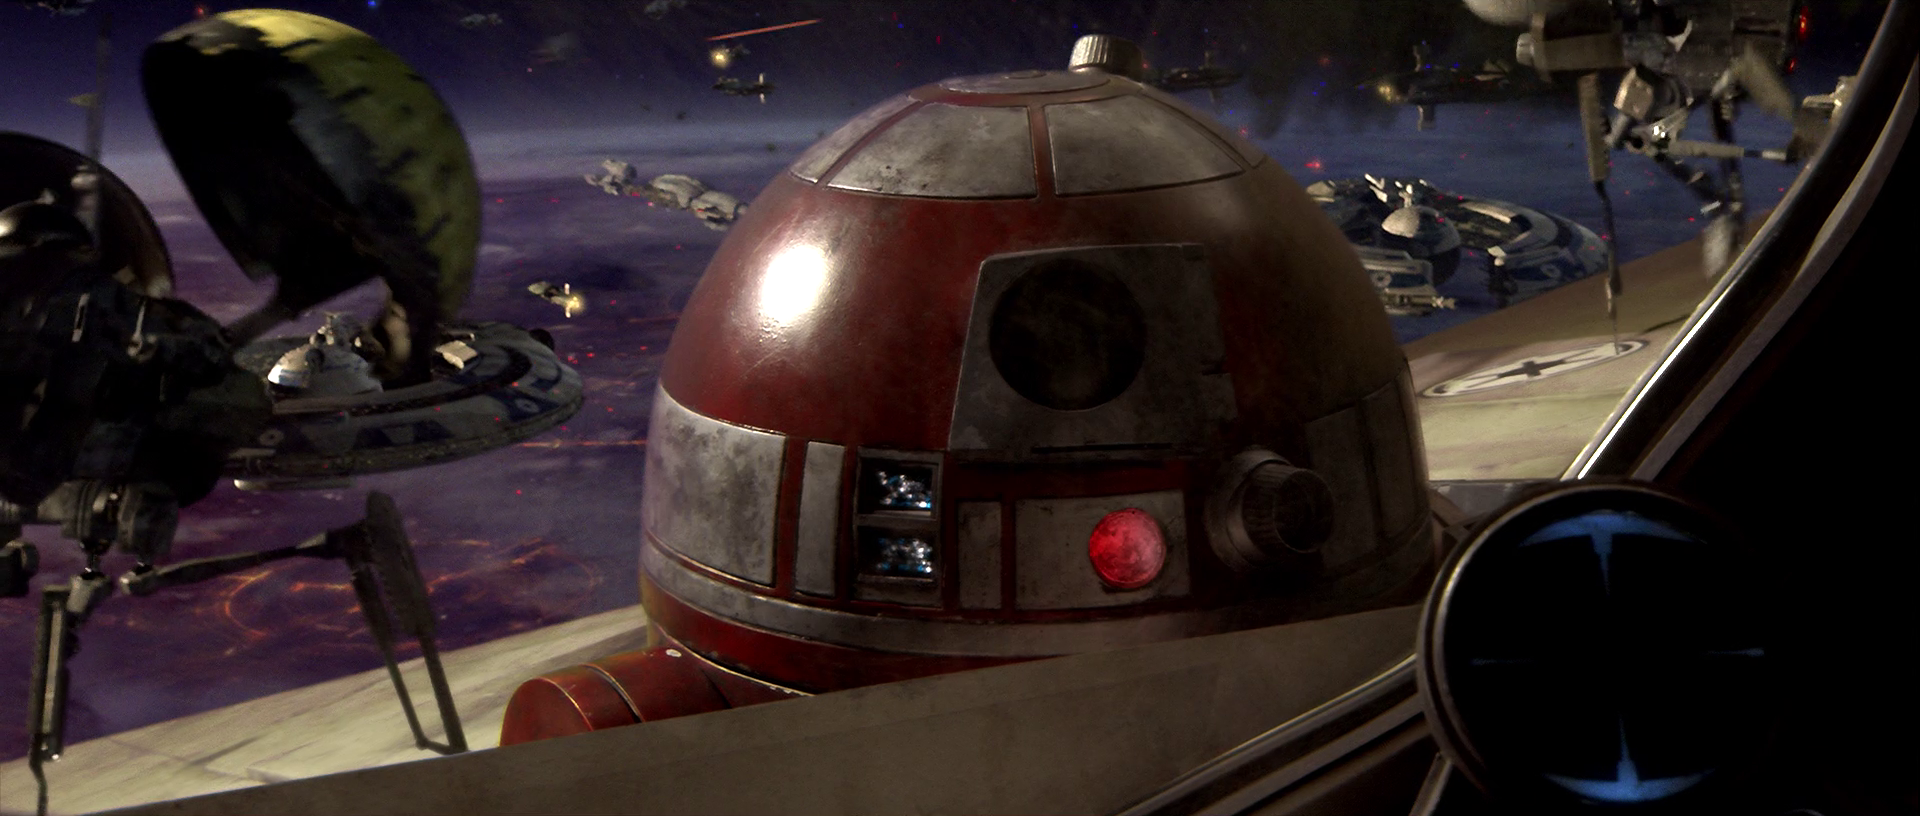 Who is this droid?